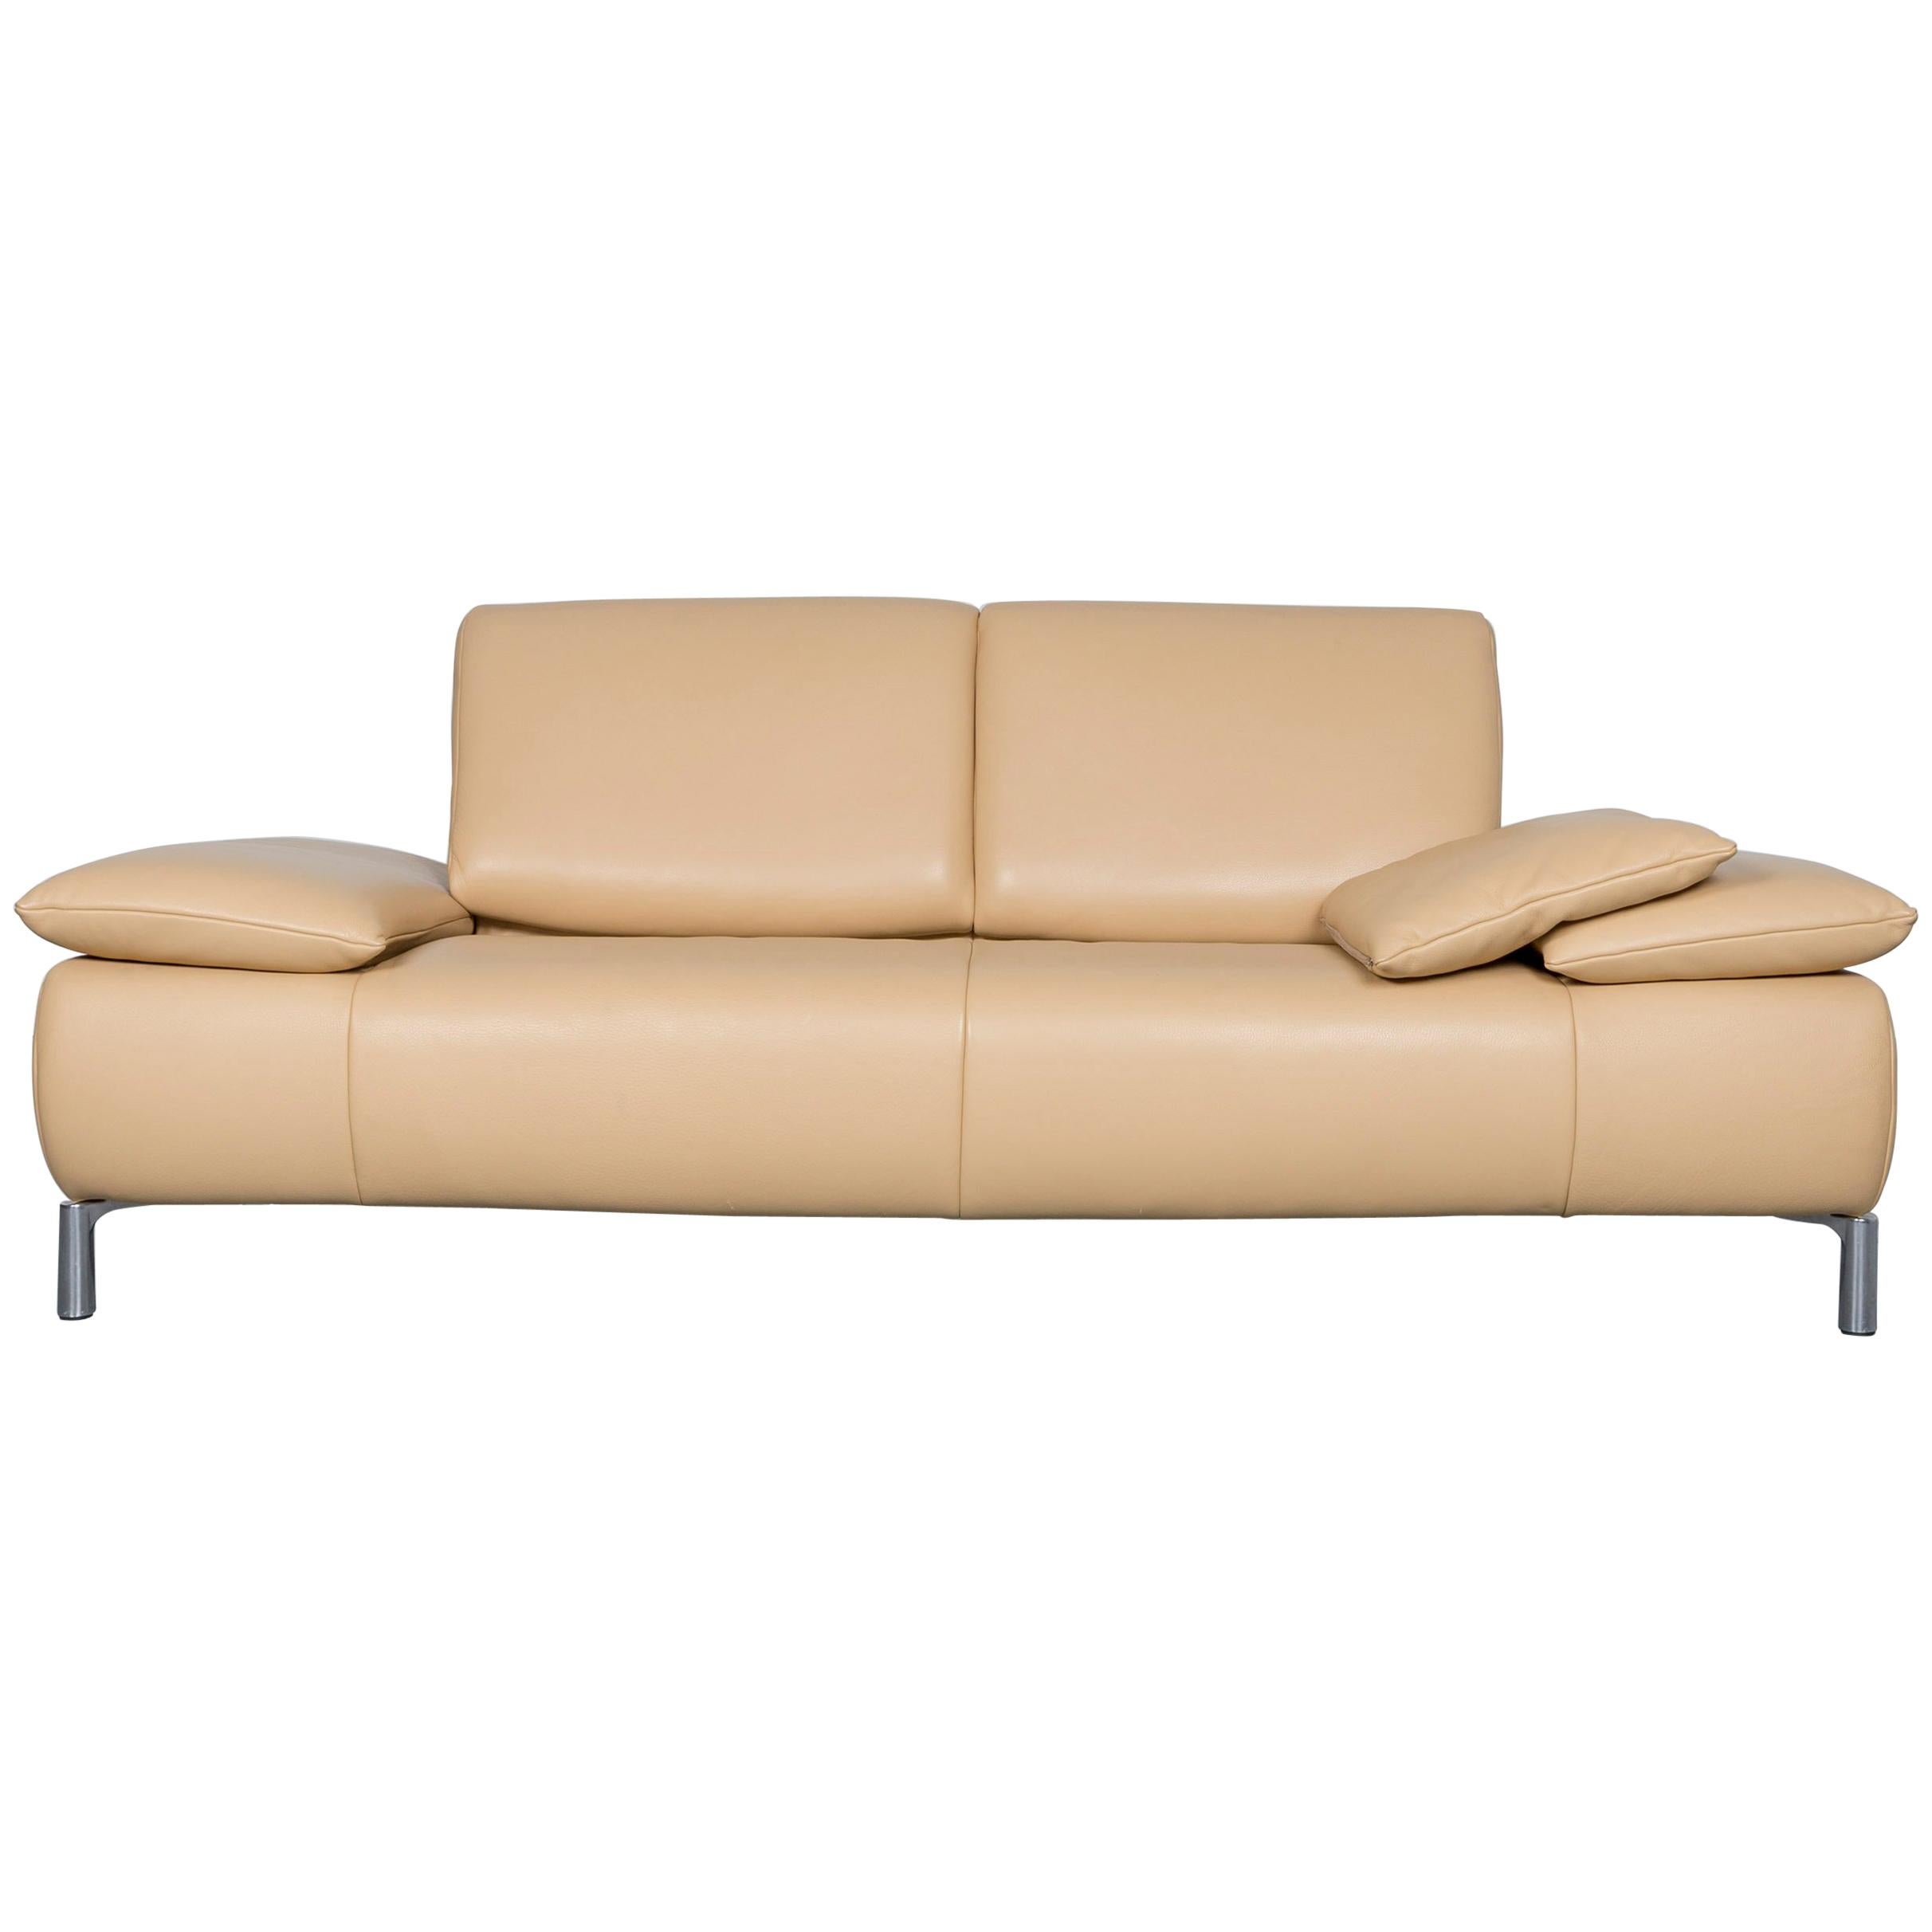 Koinor Goya Designer Leather Sofa Creme Beige Three-Seat Couch For Sale